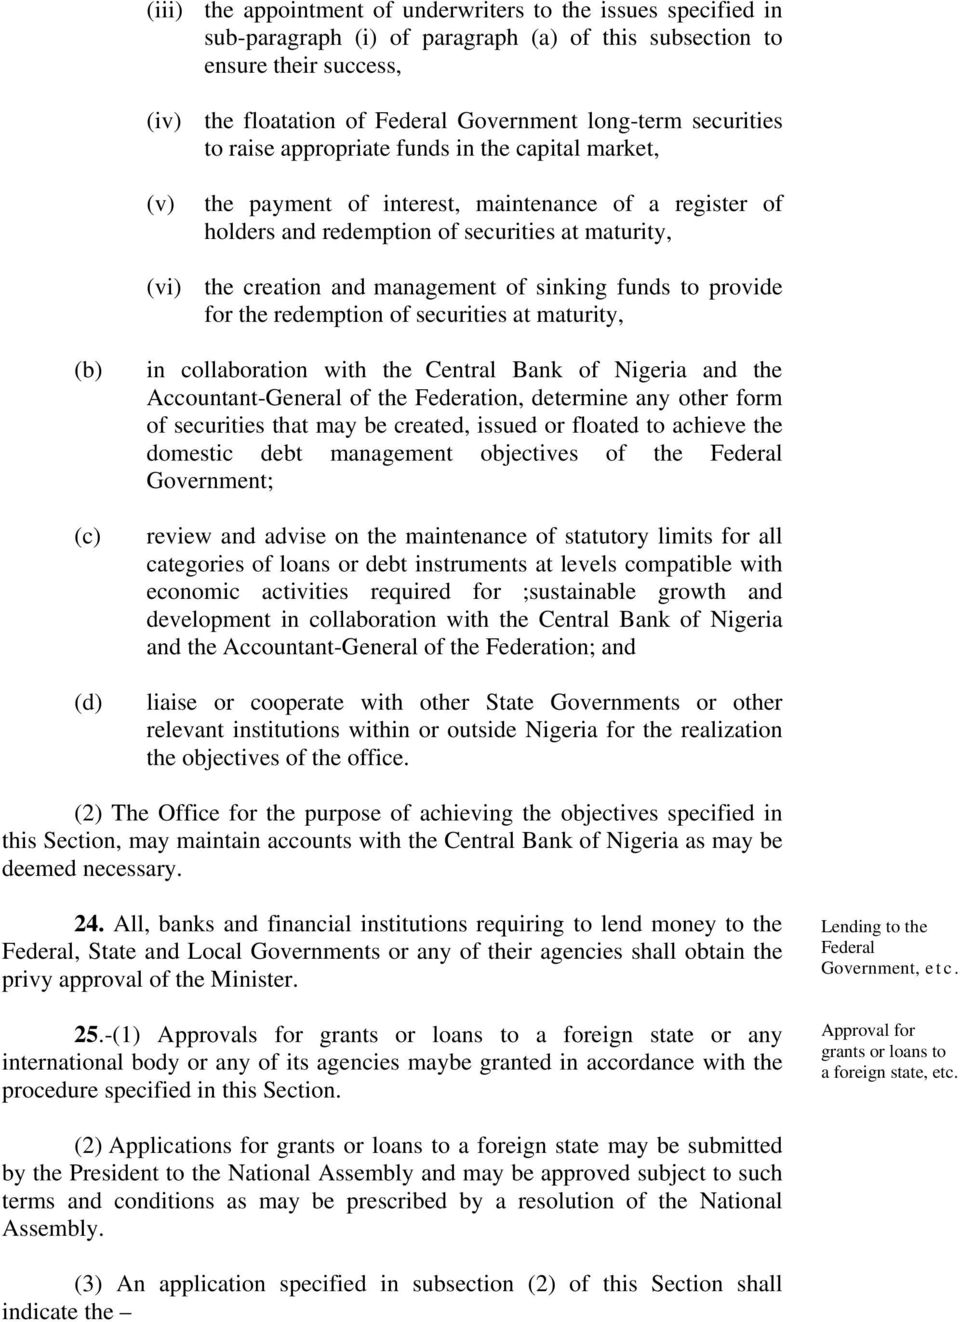 management of sinking funds to provide for the redemption of securities at maturity, (d) in collaboration with the Central Bank of Nigeria and the Accountant-General of the Federation, determine any